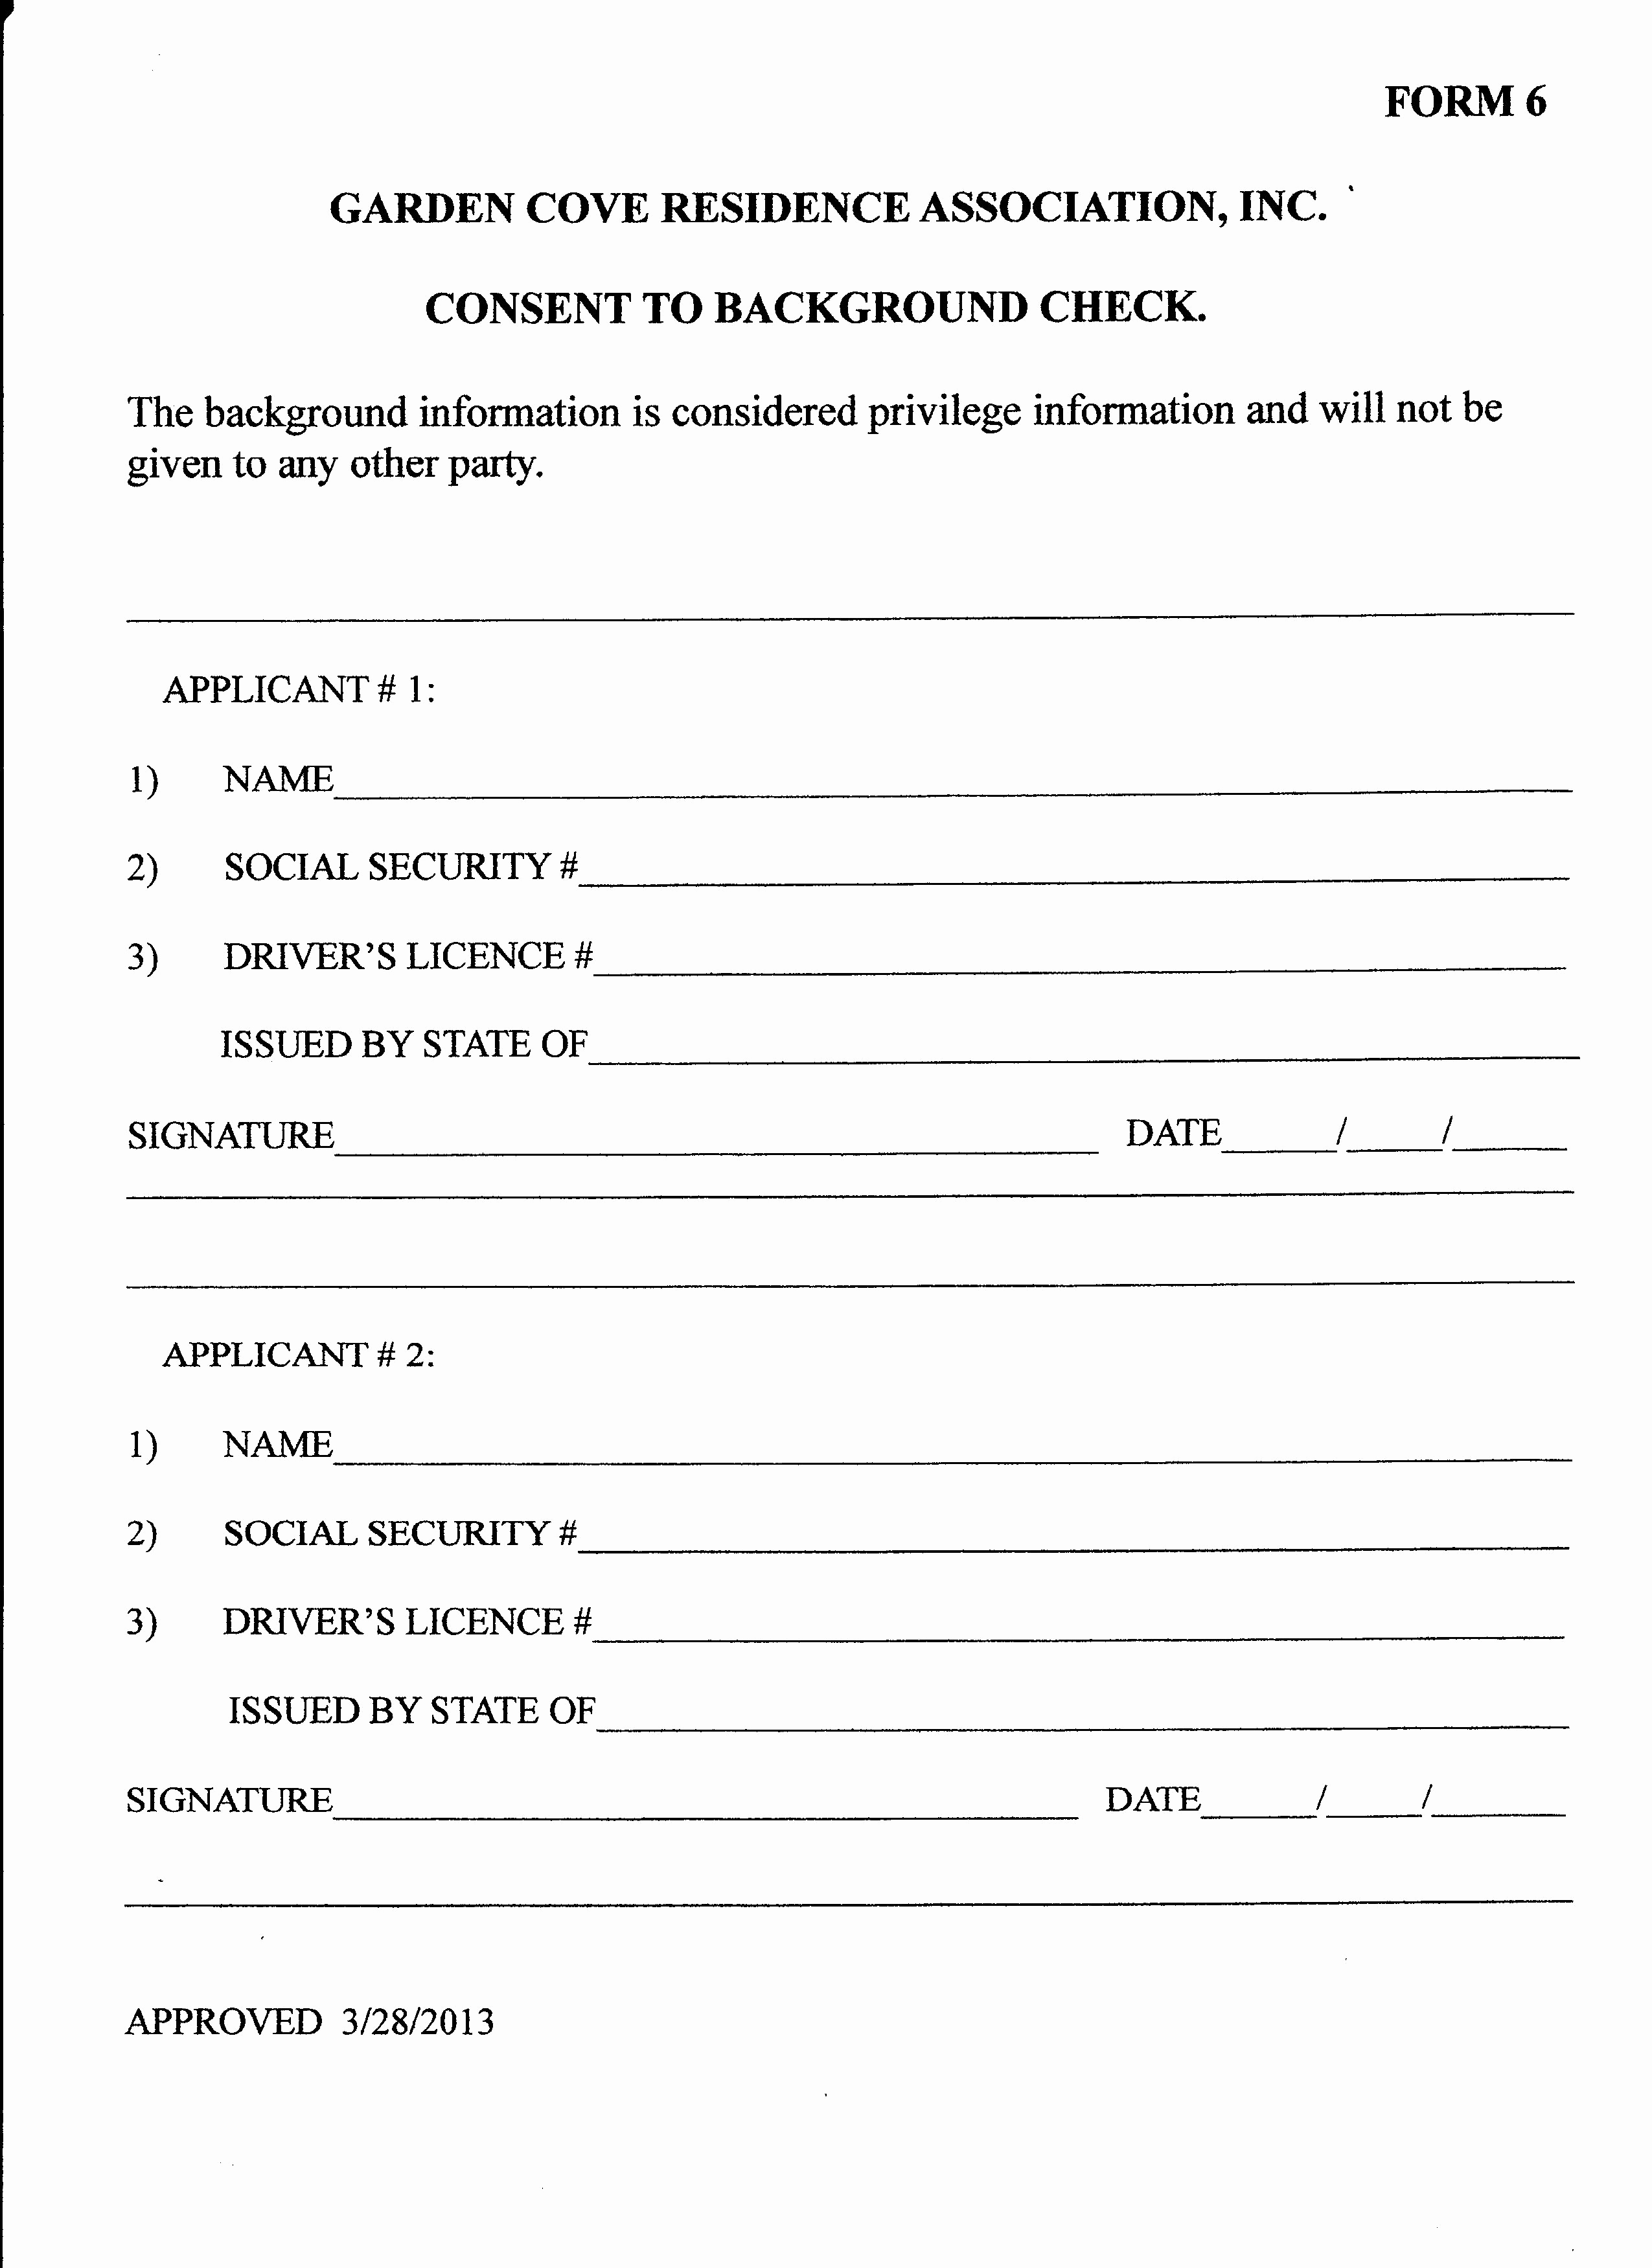 Background Check form Template Free Beautiful forms Garden Cove Park